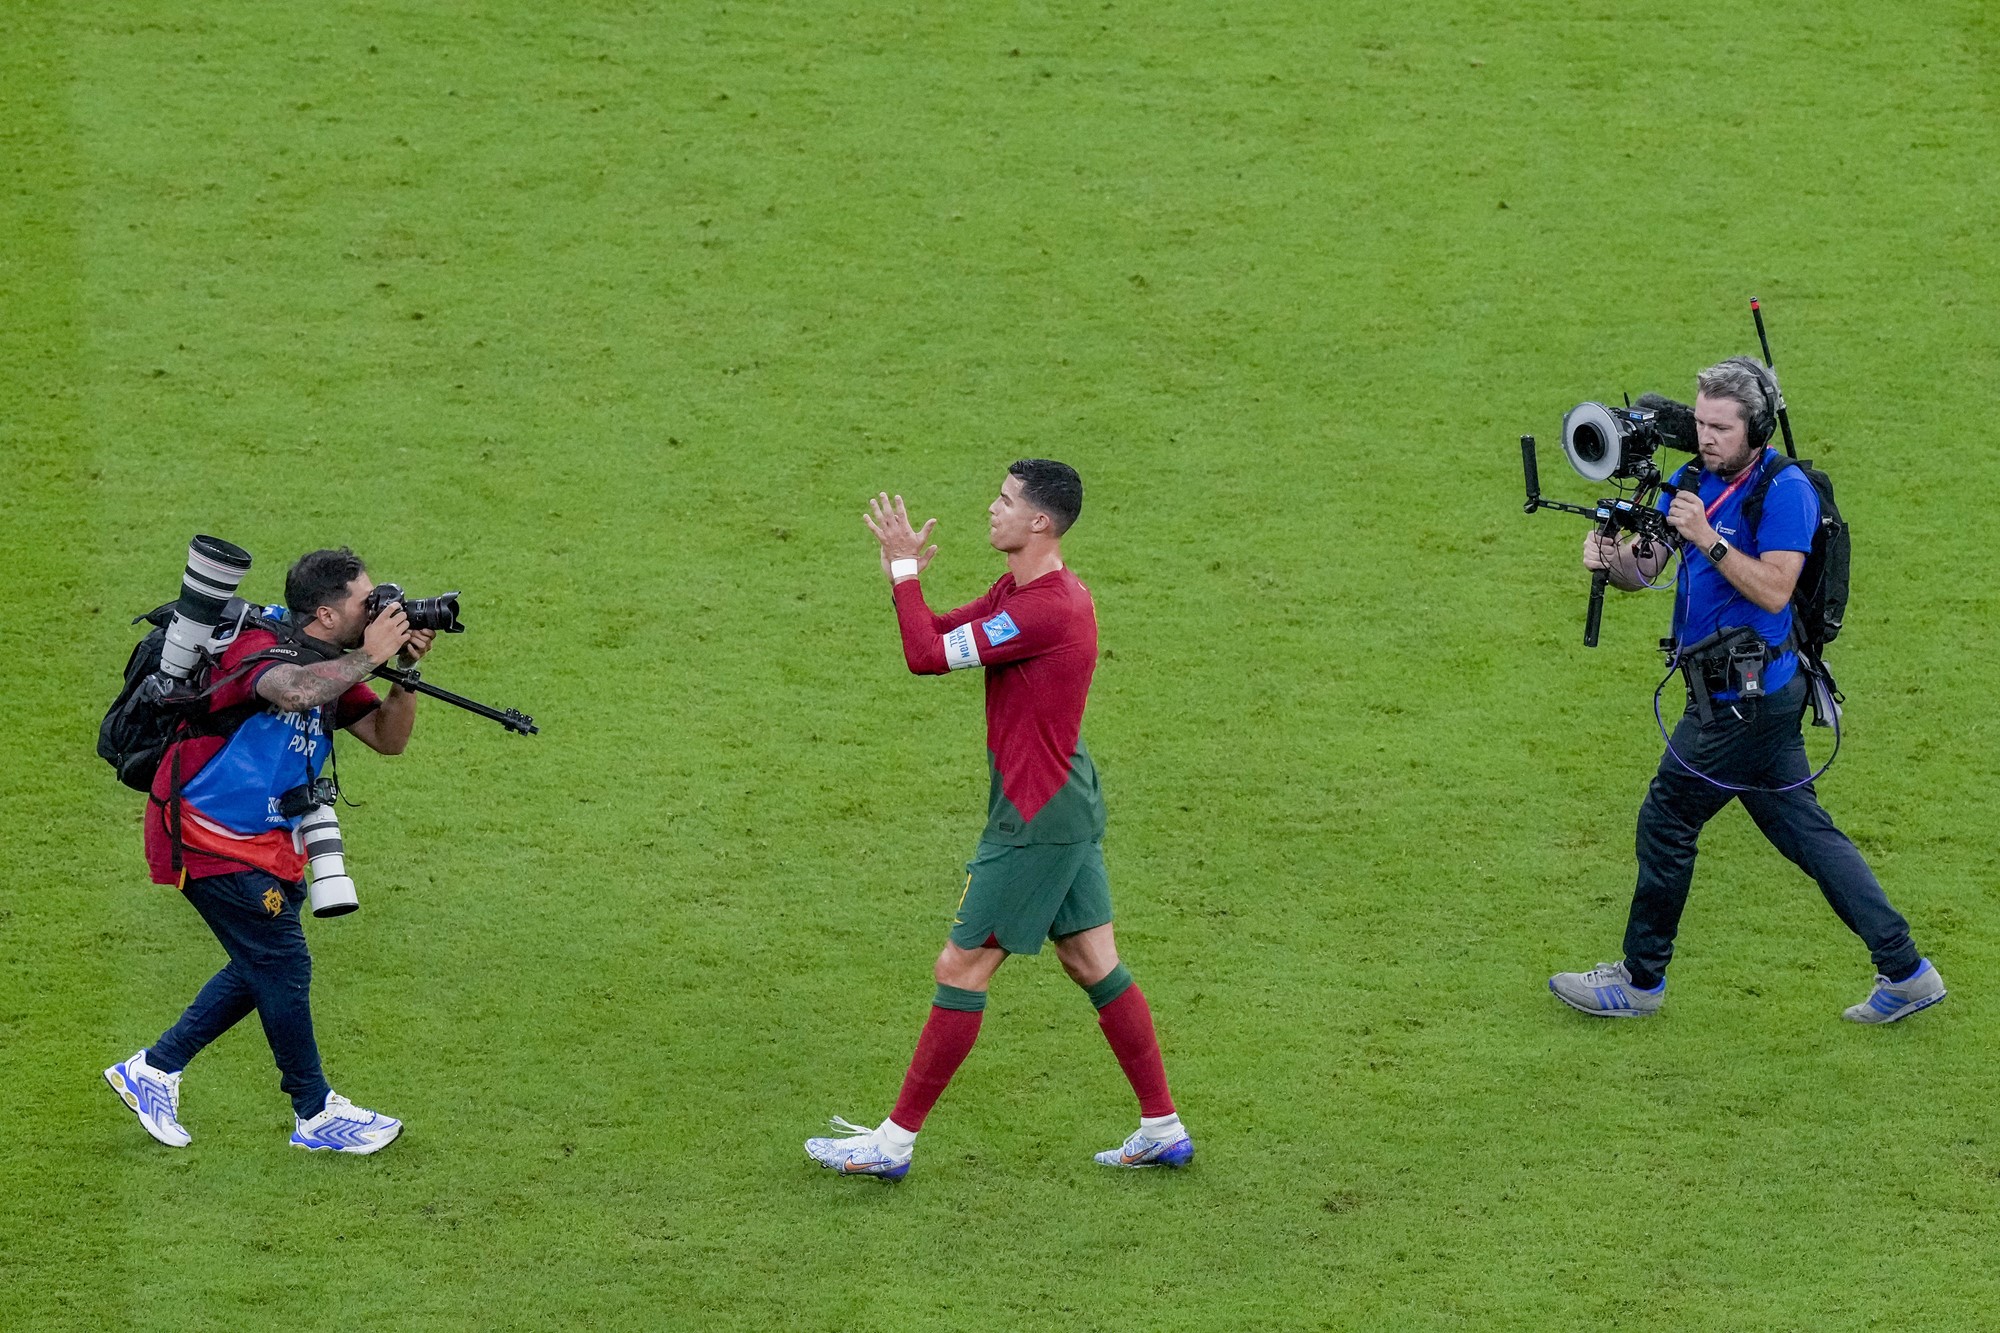 Cristiano Ronaldo applauds fans after Portugal's win over Switzerland at the Qatar World Cup. Two cameramen follow him.